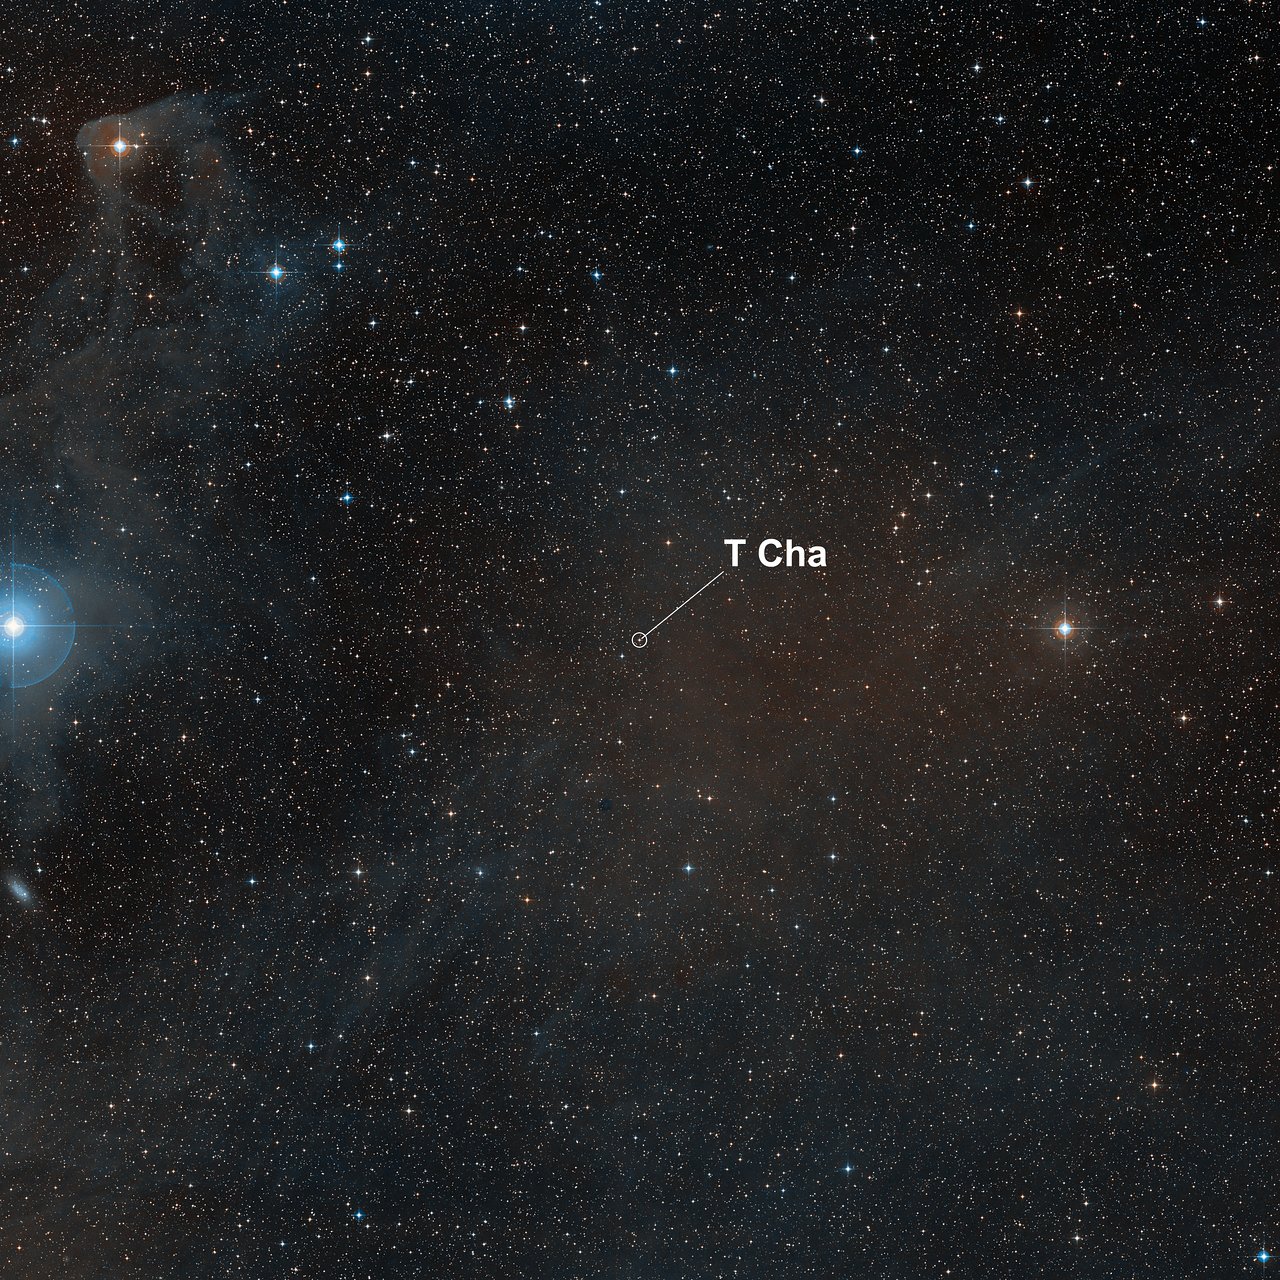 A view of a starry patch of sky with one area with an arrow indicating the location of T Cha.